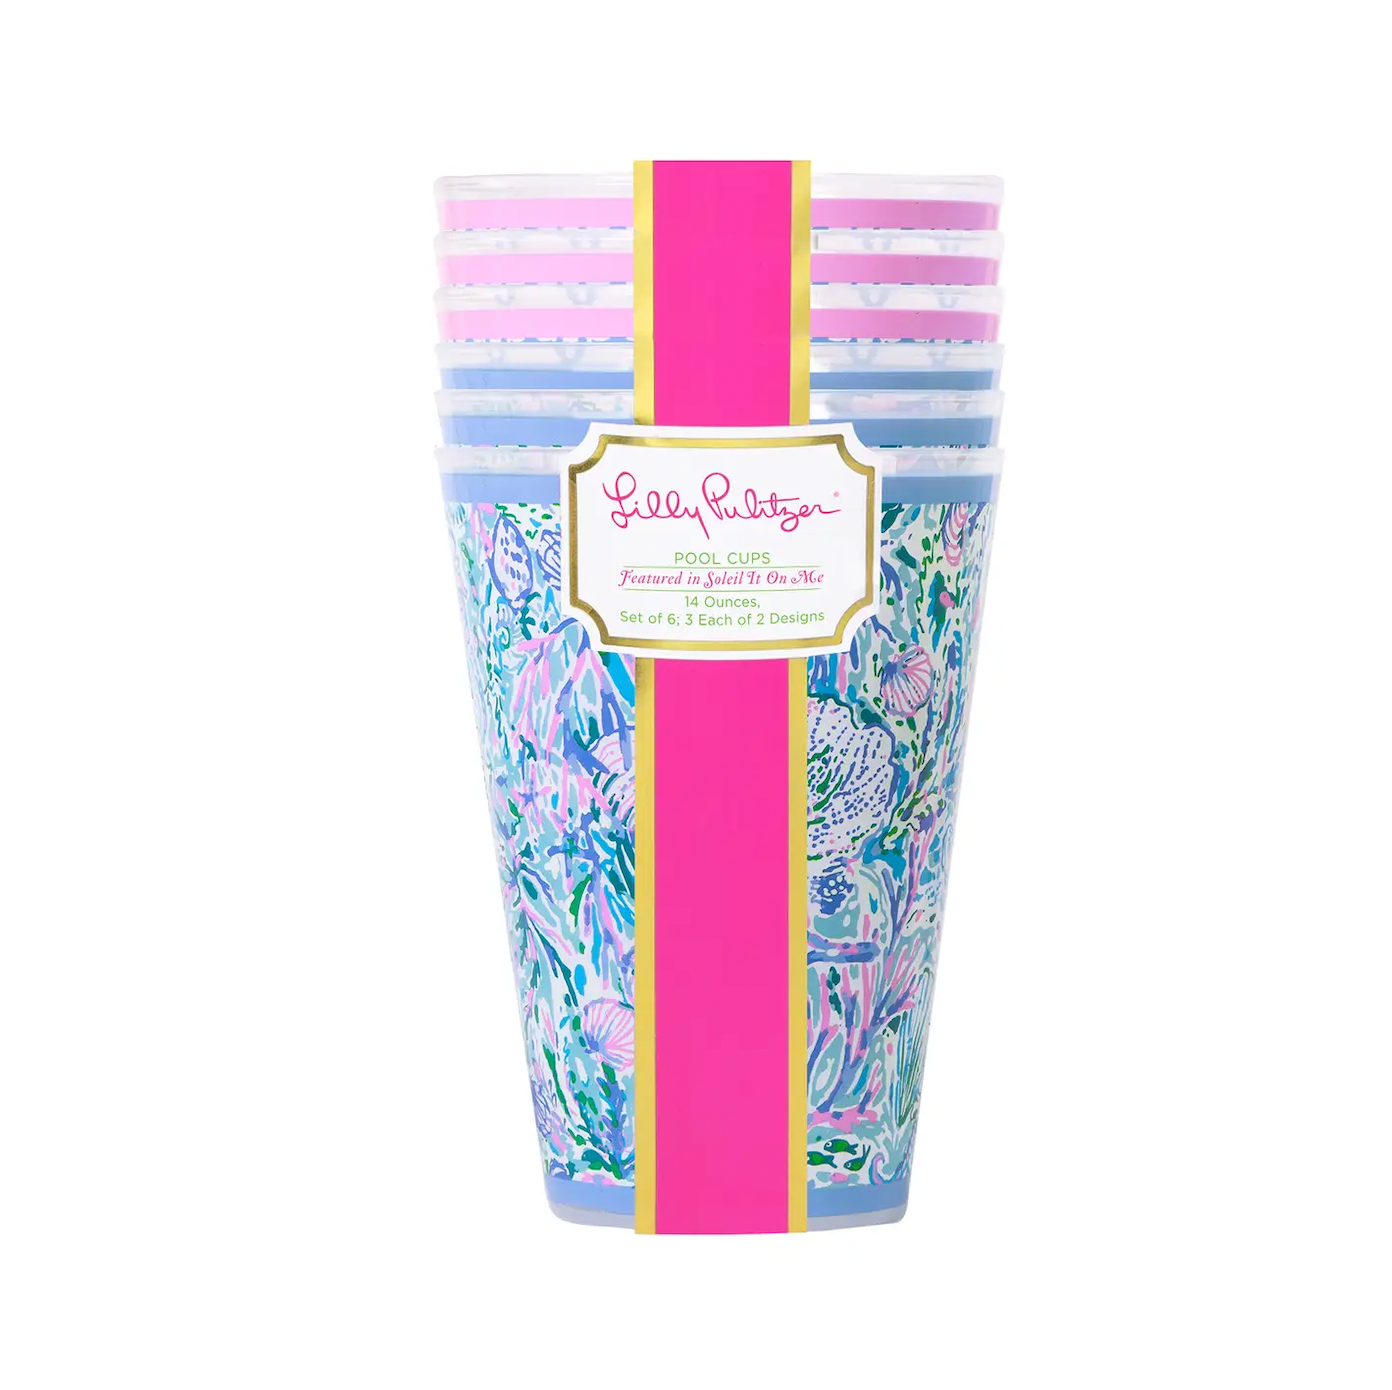 Lilly Pulitzer Pool Cups - Soleil It On Me